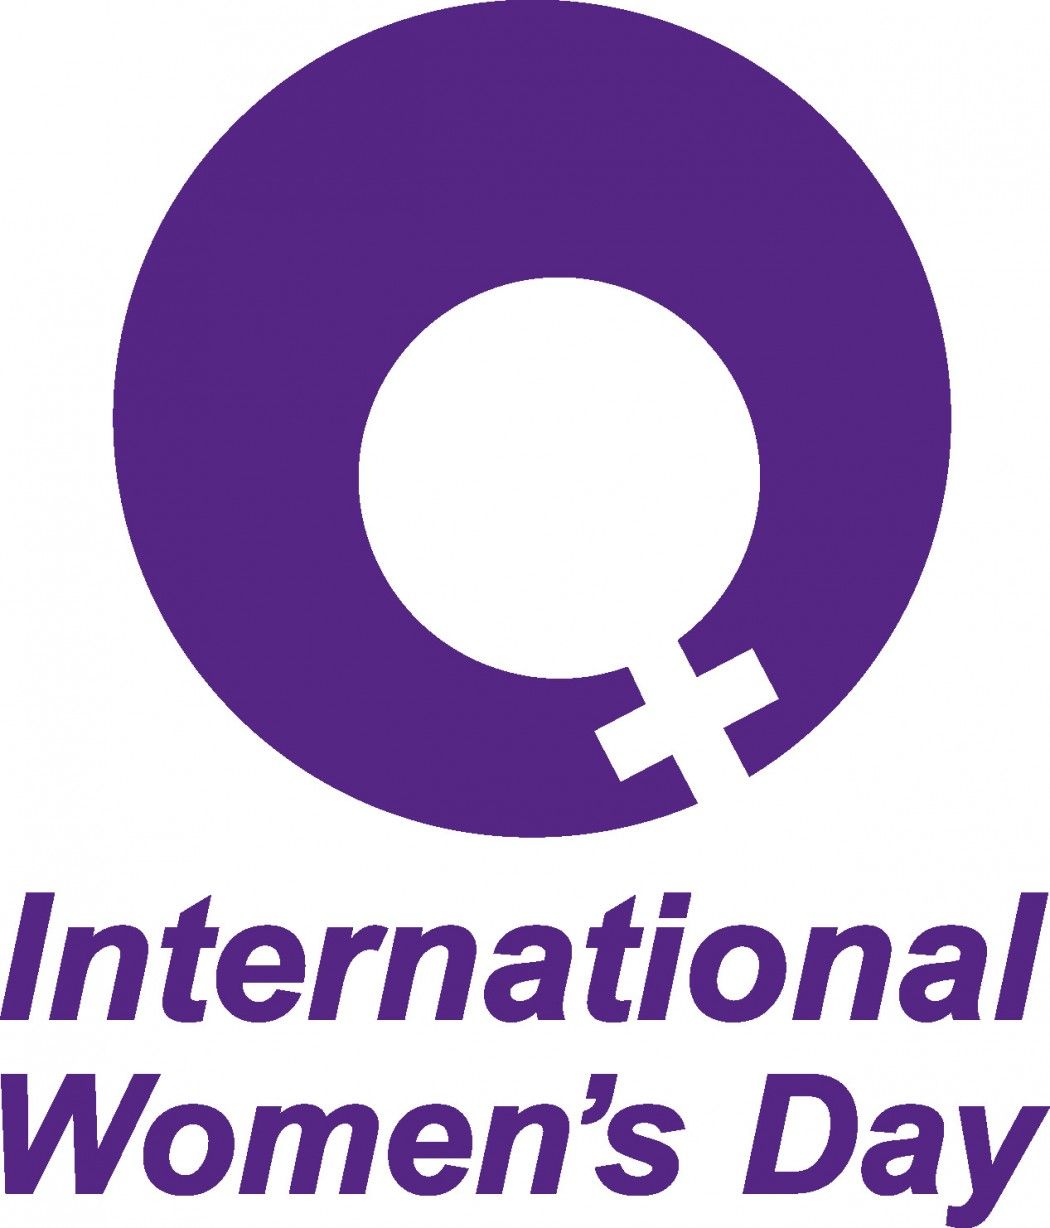 Nominations to Honour Women for International Women's Day